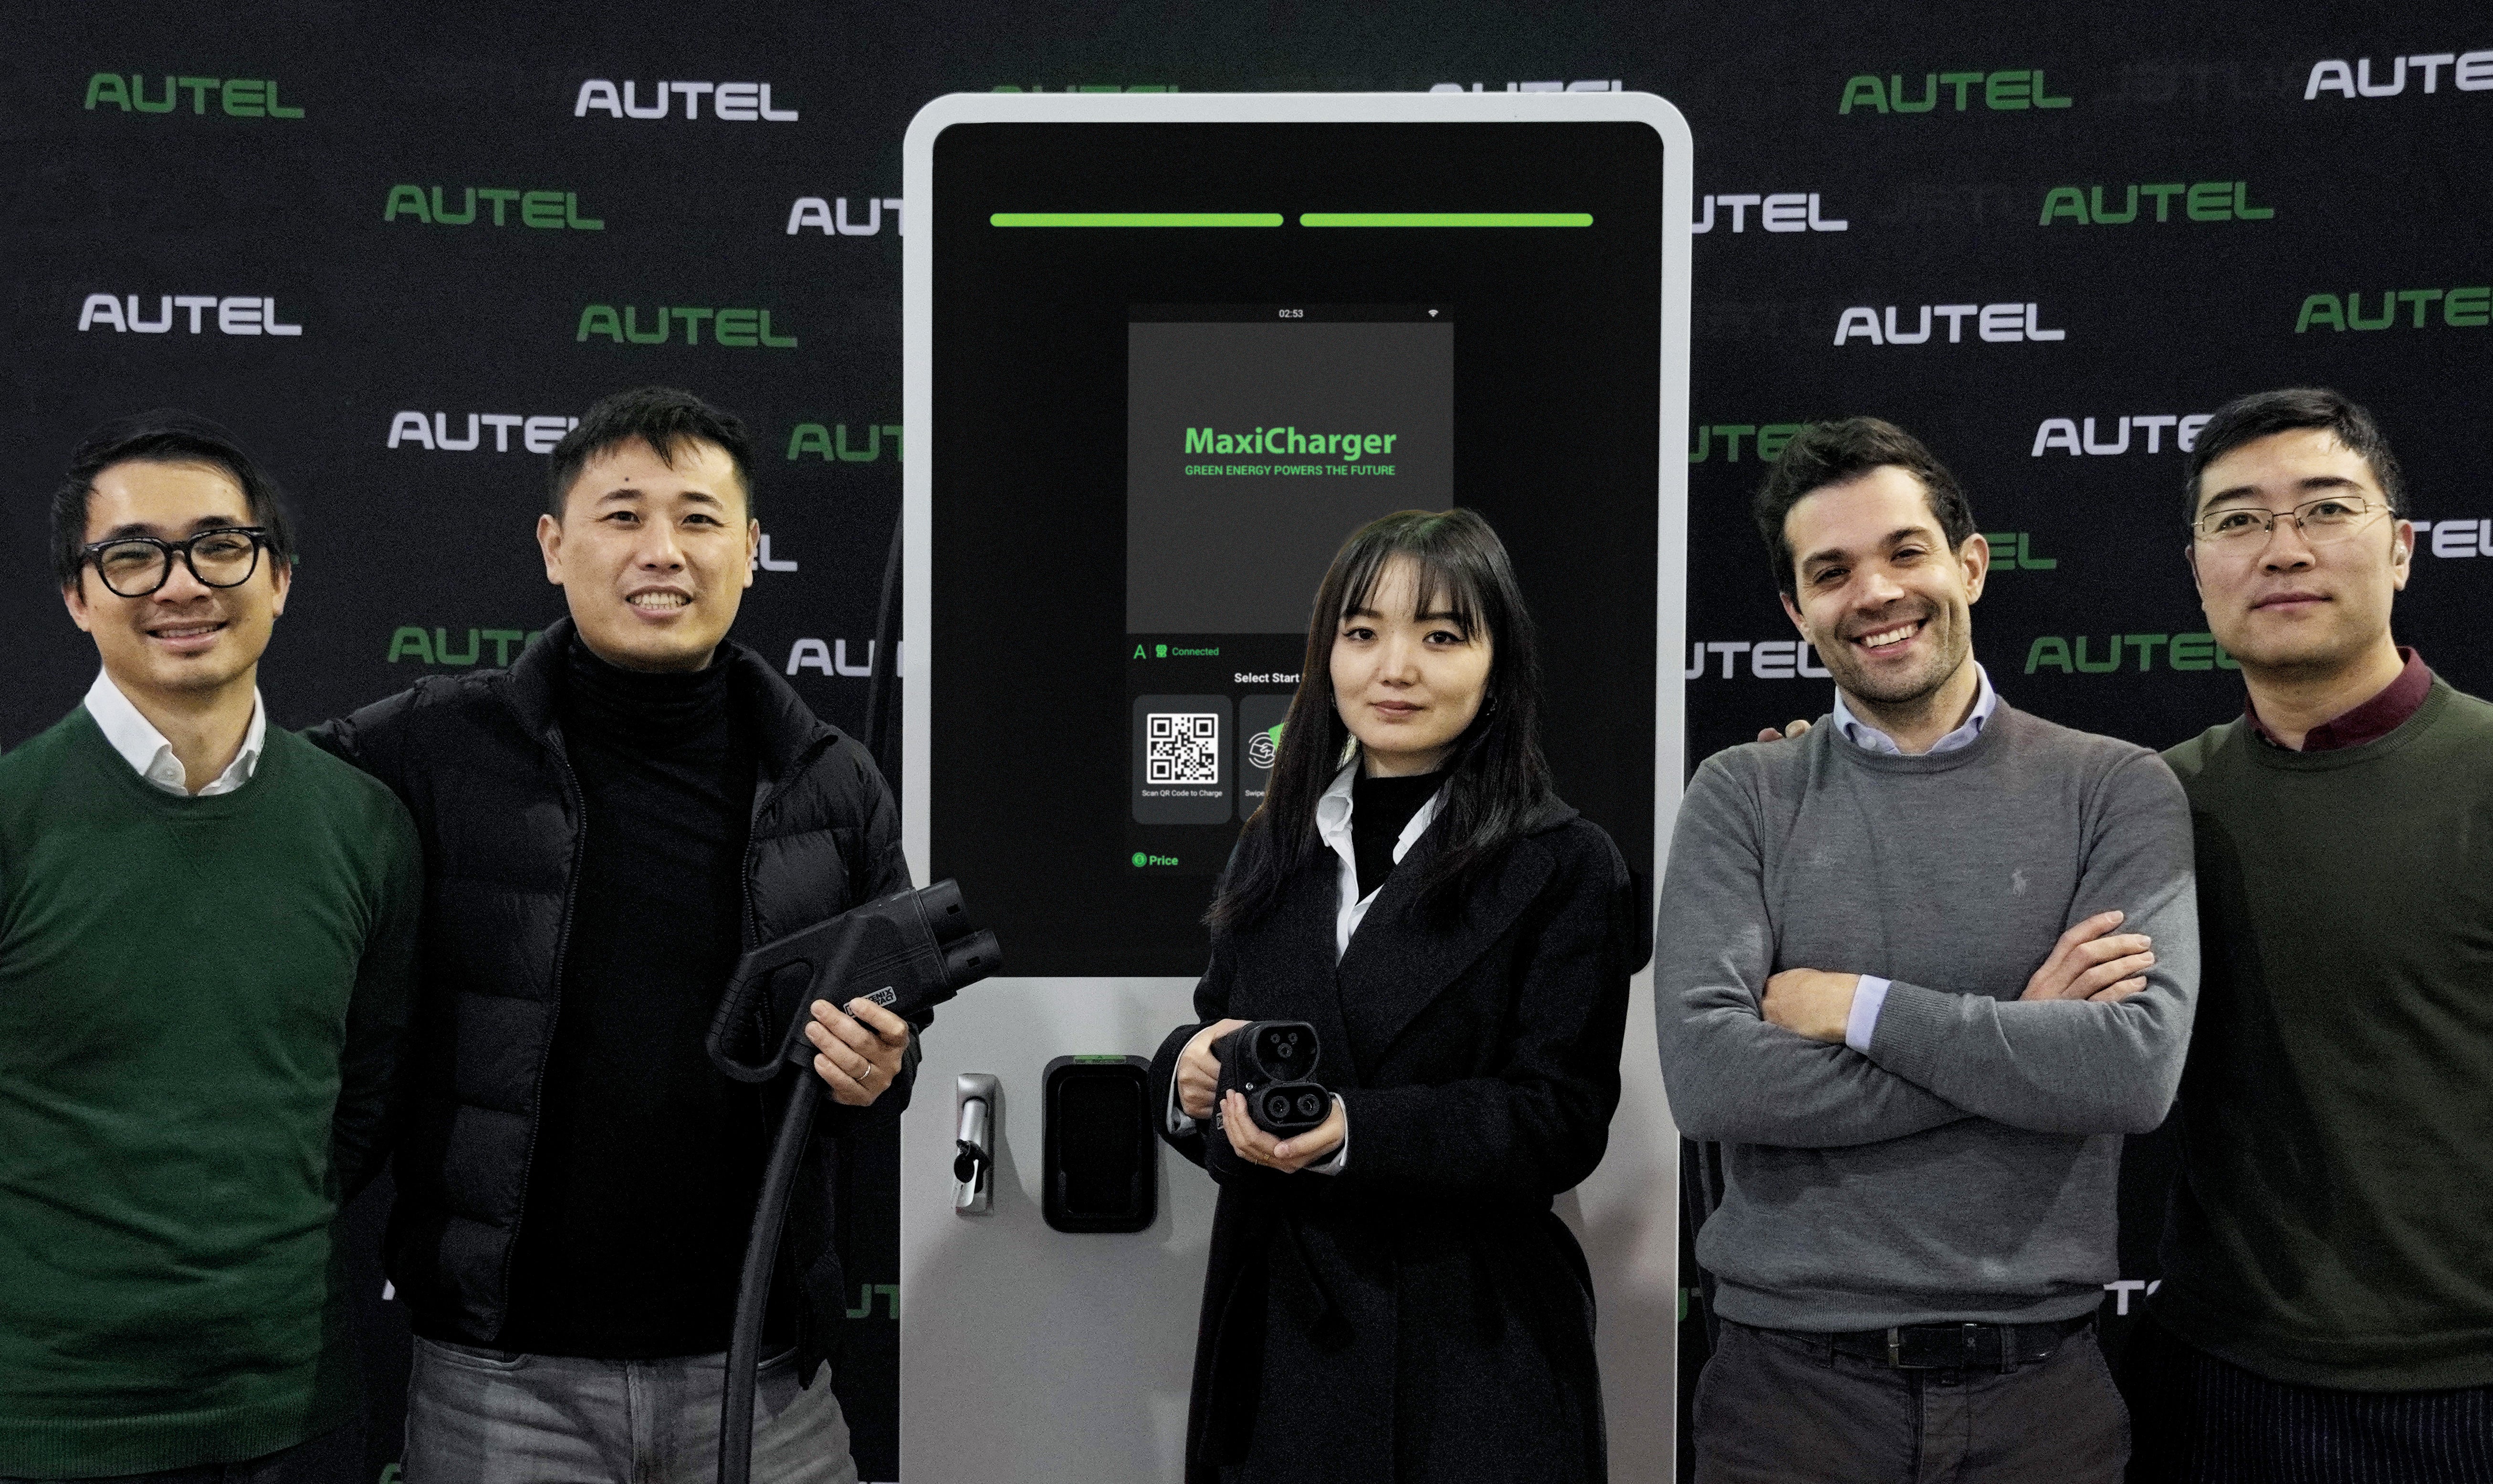 What’s been happening with Autel in 2022